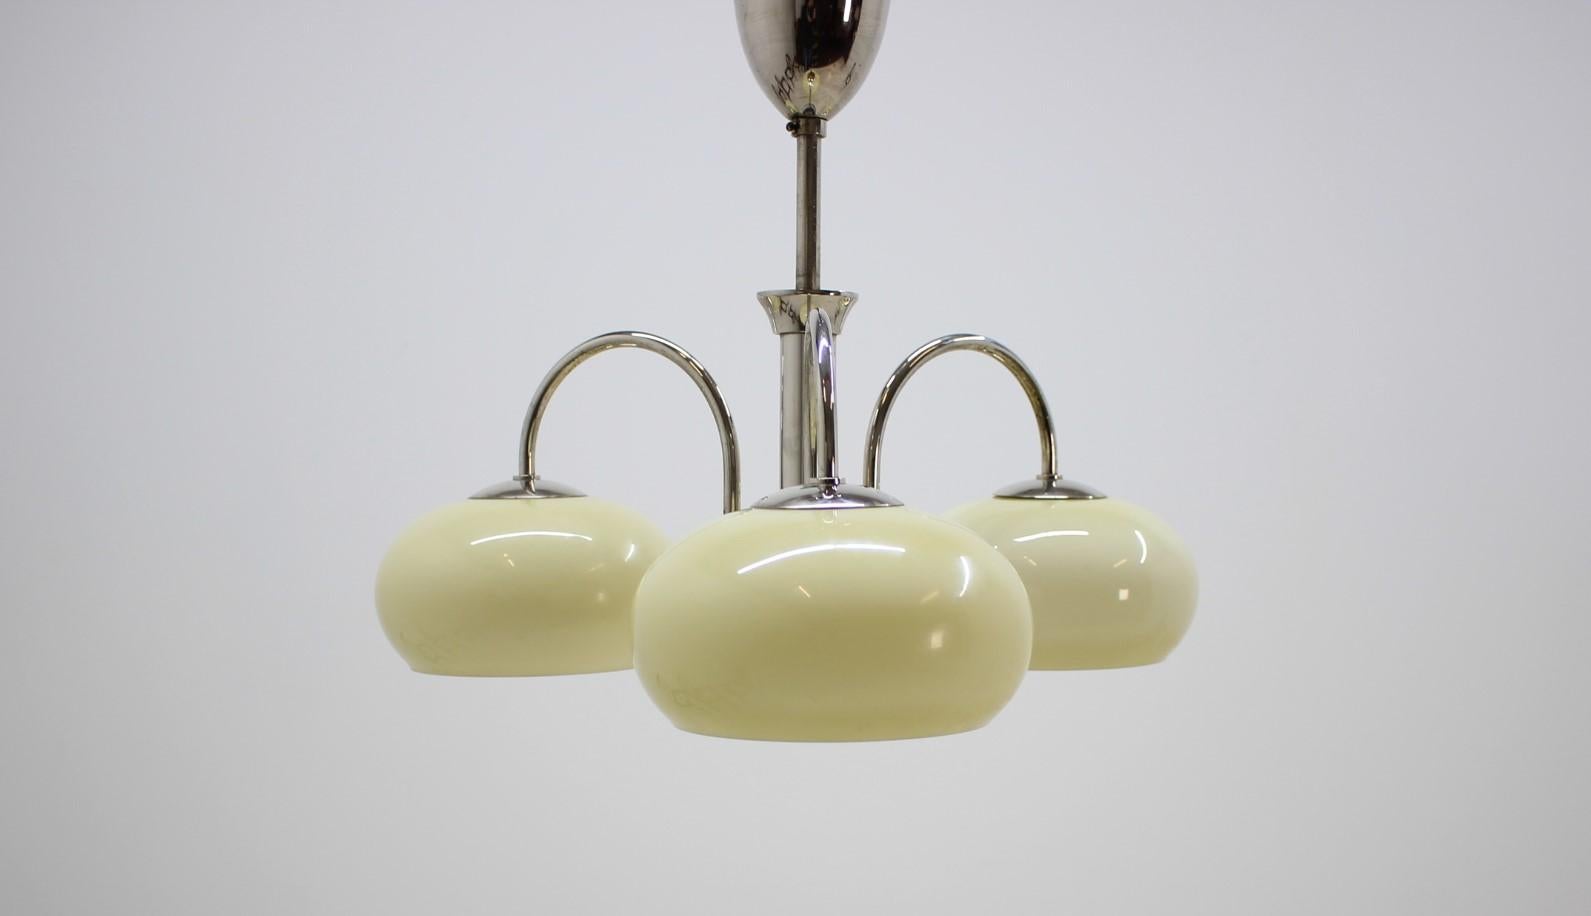 - Very nice style of lighting 
- 1930s
- Functionalism
- Original condition with patina
- Original shades.
 